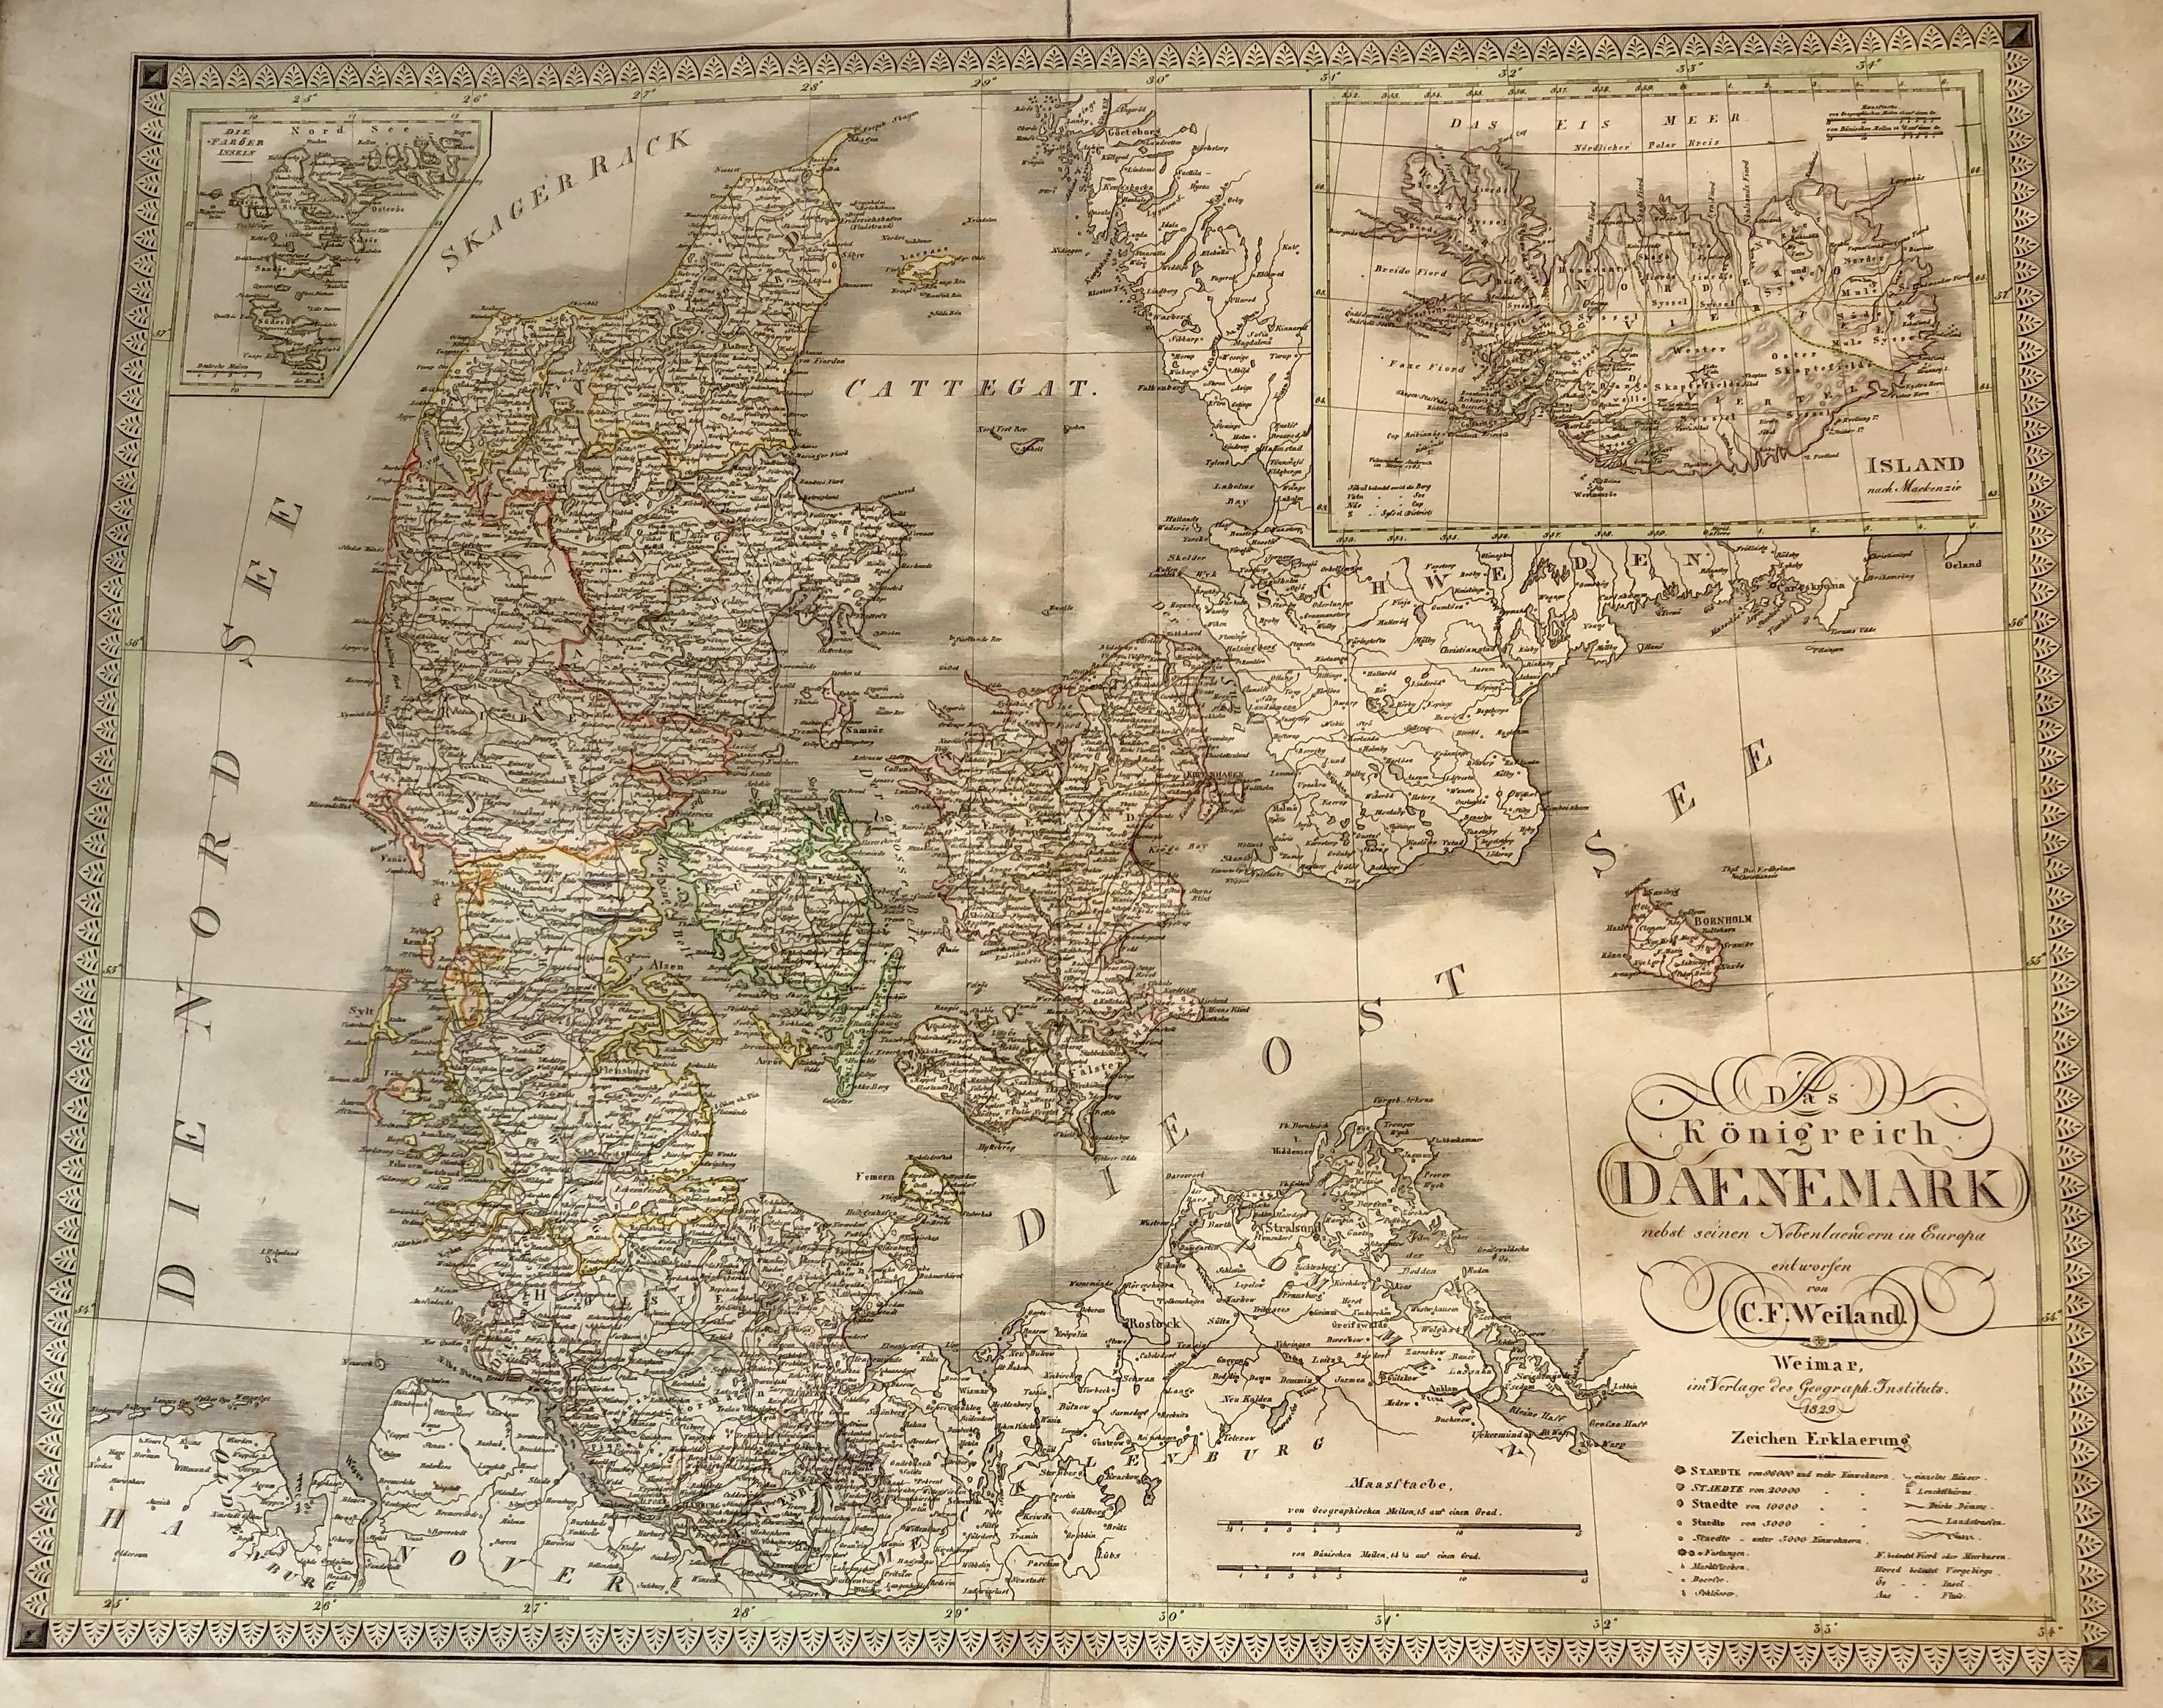 Antique map of Denmark in a black wooden frame and glass screen.
Made by German C. F. Weiland, Weimar in 1829.